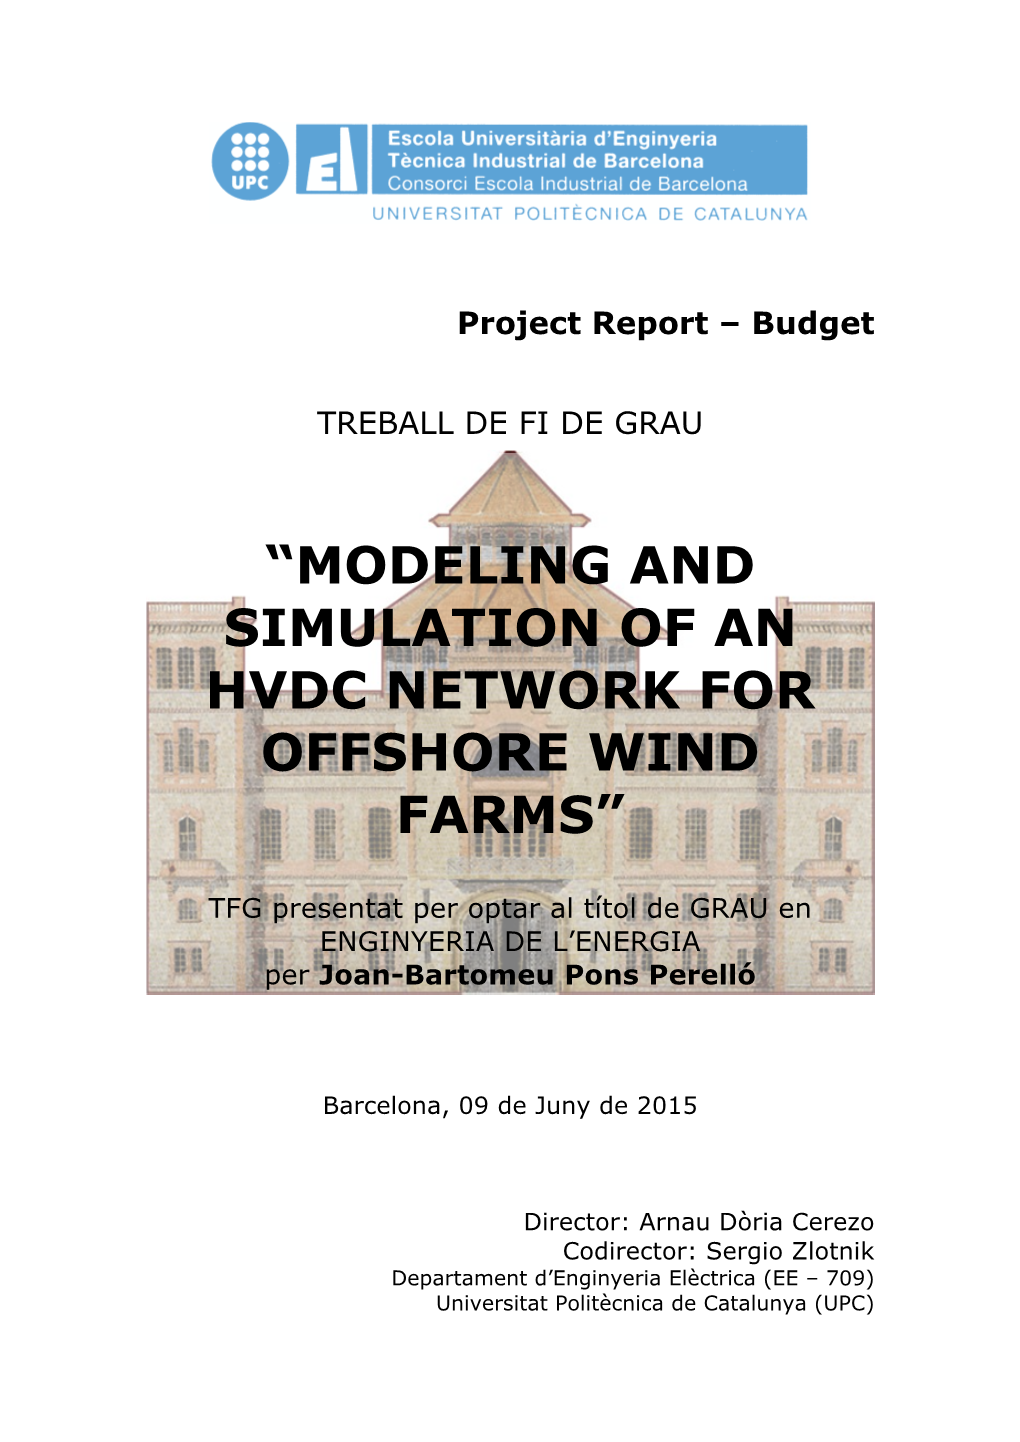 Modeling and Simulation of an Hvdc Network for Offshore Wind Farms”